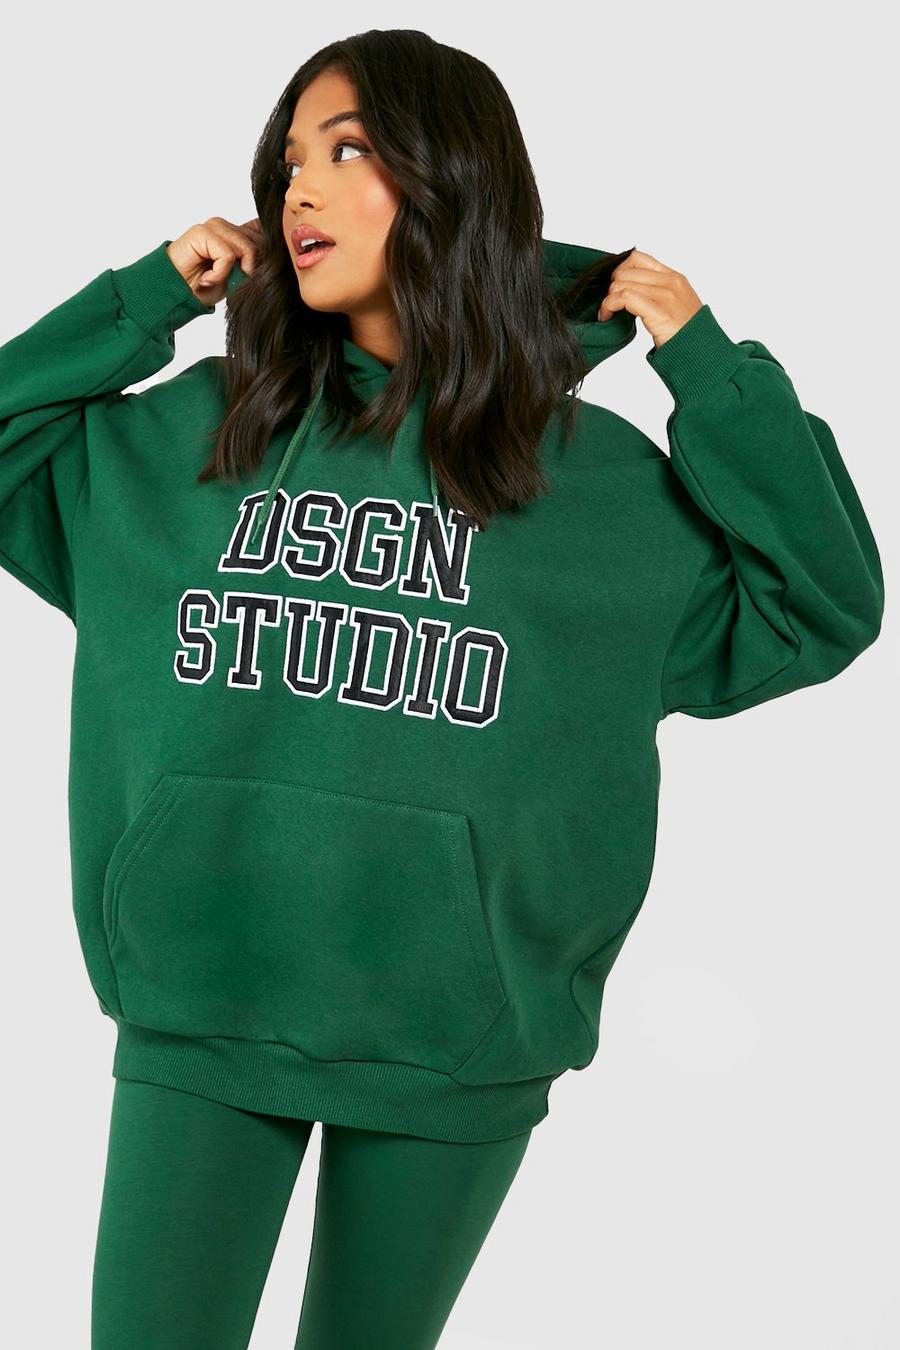 Forest Icon Dsgn Studio Printed Hoody And Leggings Tracksuit 